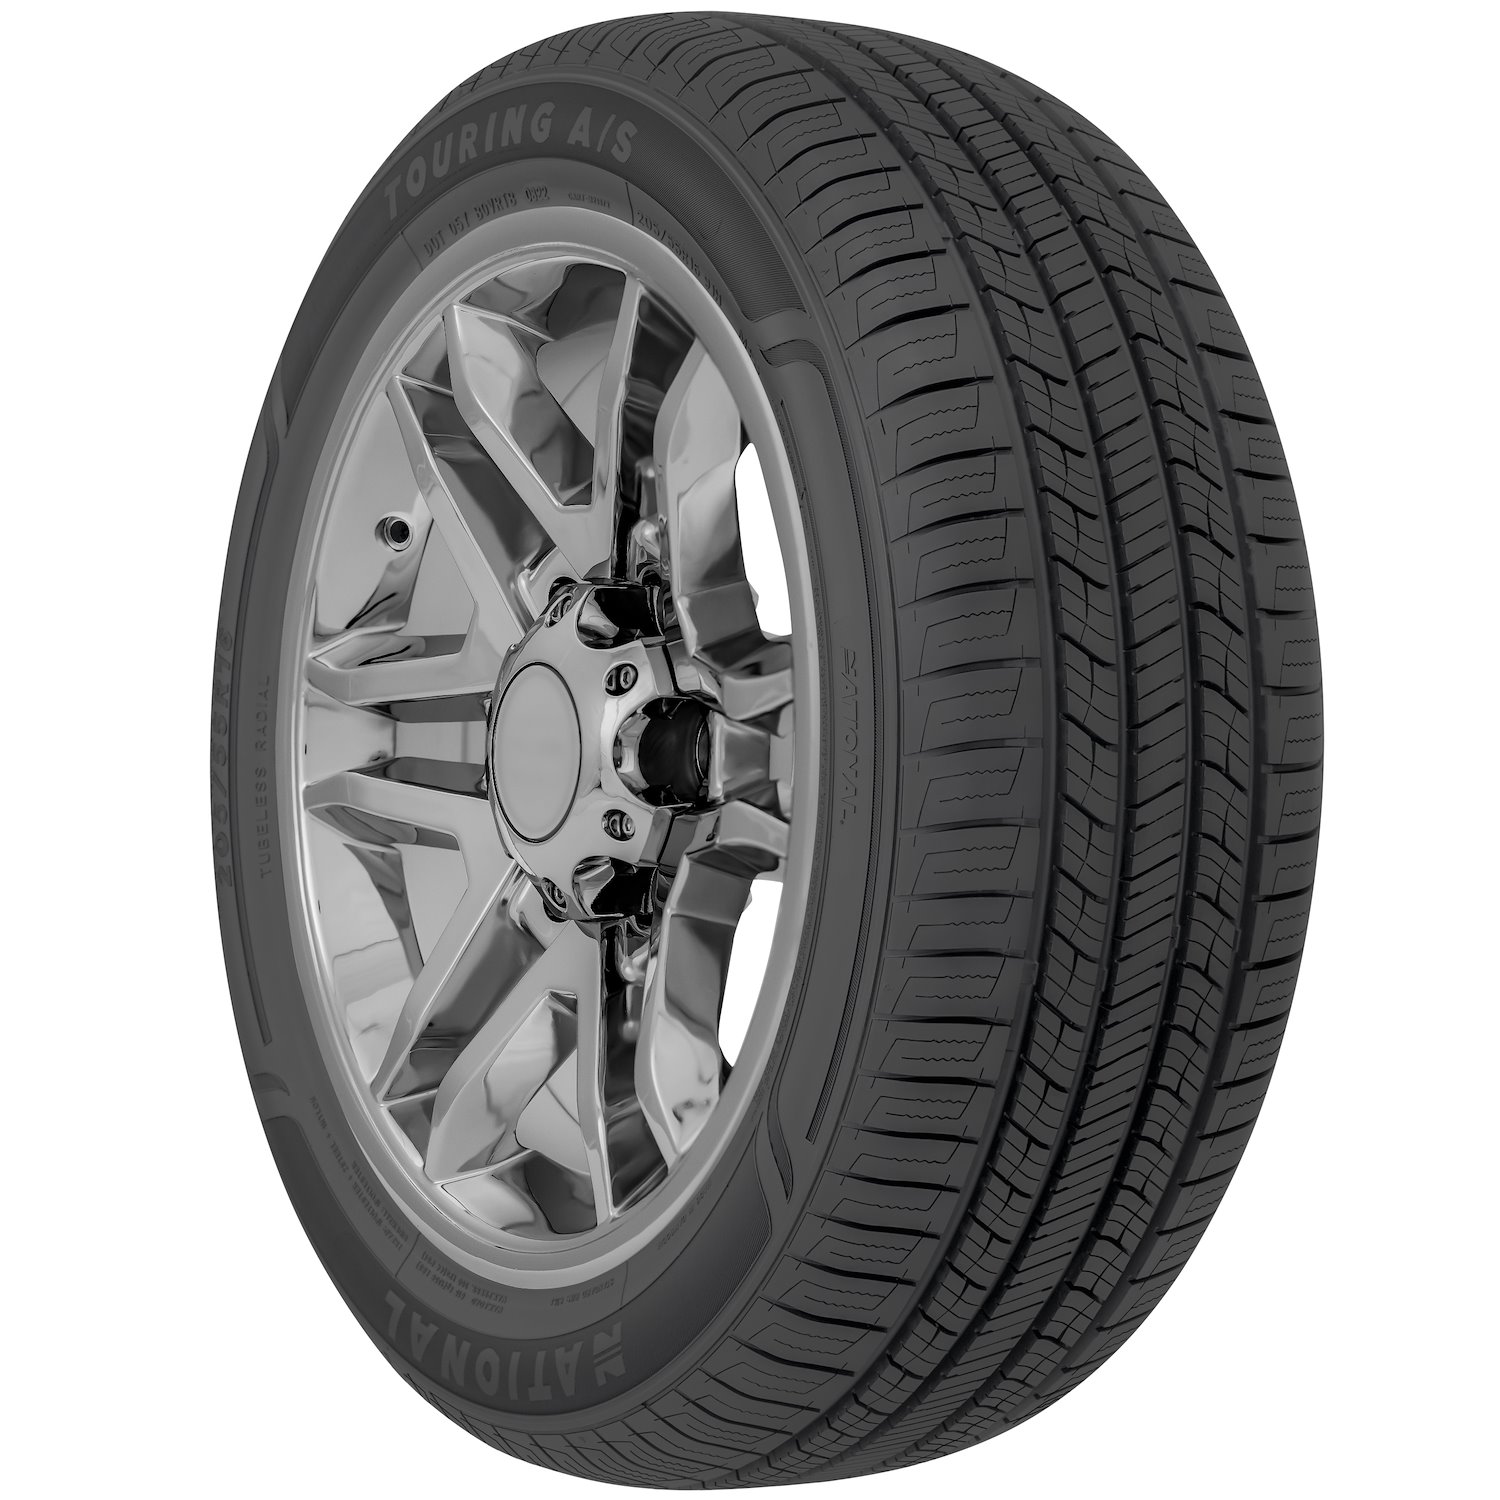 NLR71 Touring A/S Tire, 225/45R17